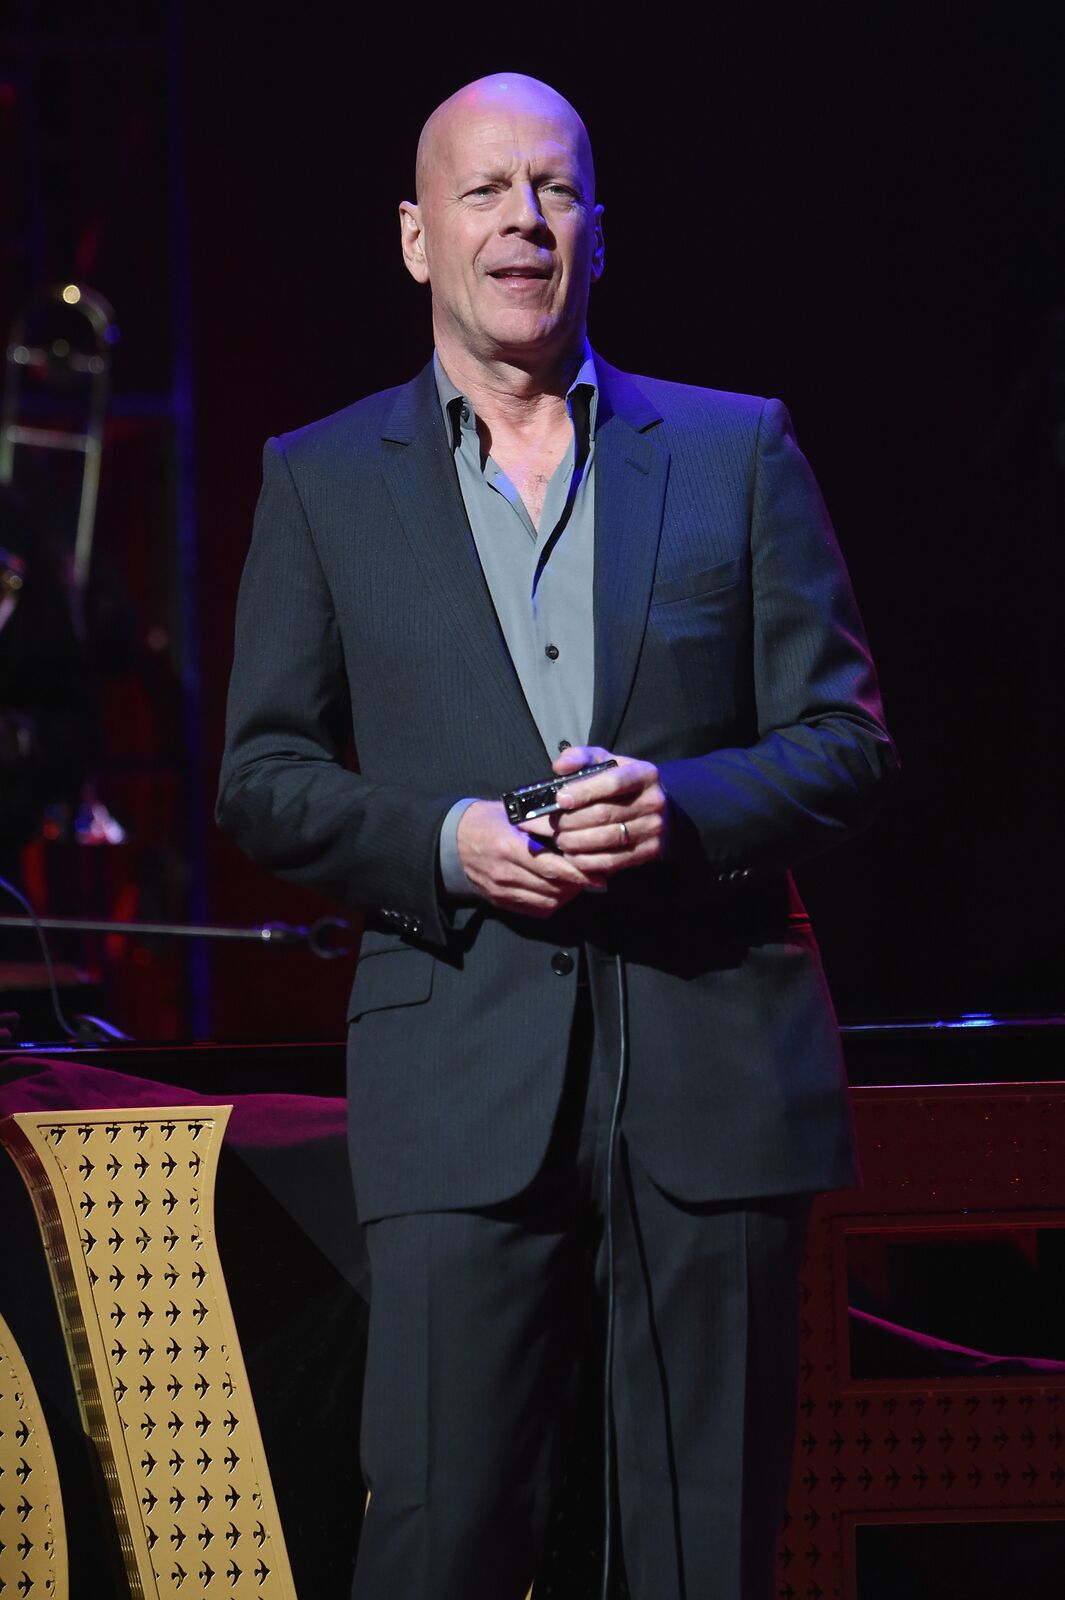 Bruce Willis at "Love Rocks NYC! A Change is Gonna Come: Celebrating Songs of Peace, Love and Hope" held at Beacon Theatre on March 9, 2017, in New York City | Photo: Jamie McCarthy/Getty Images